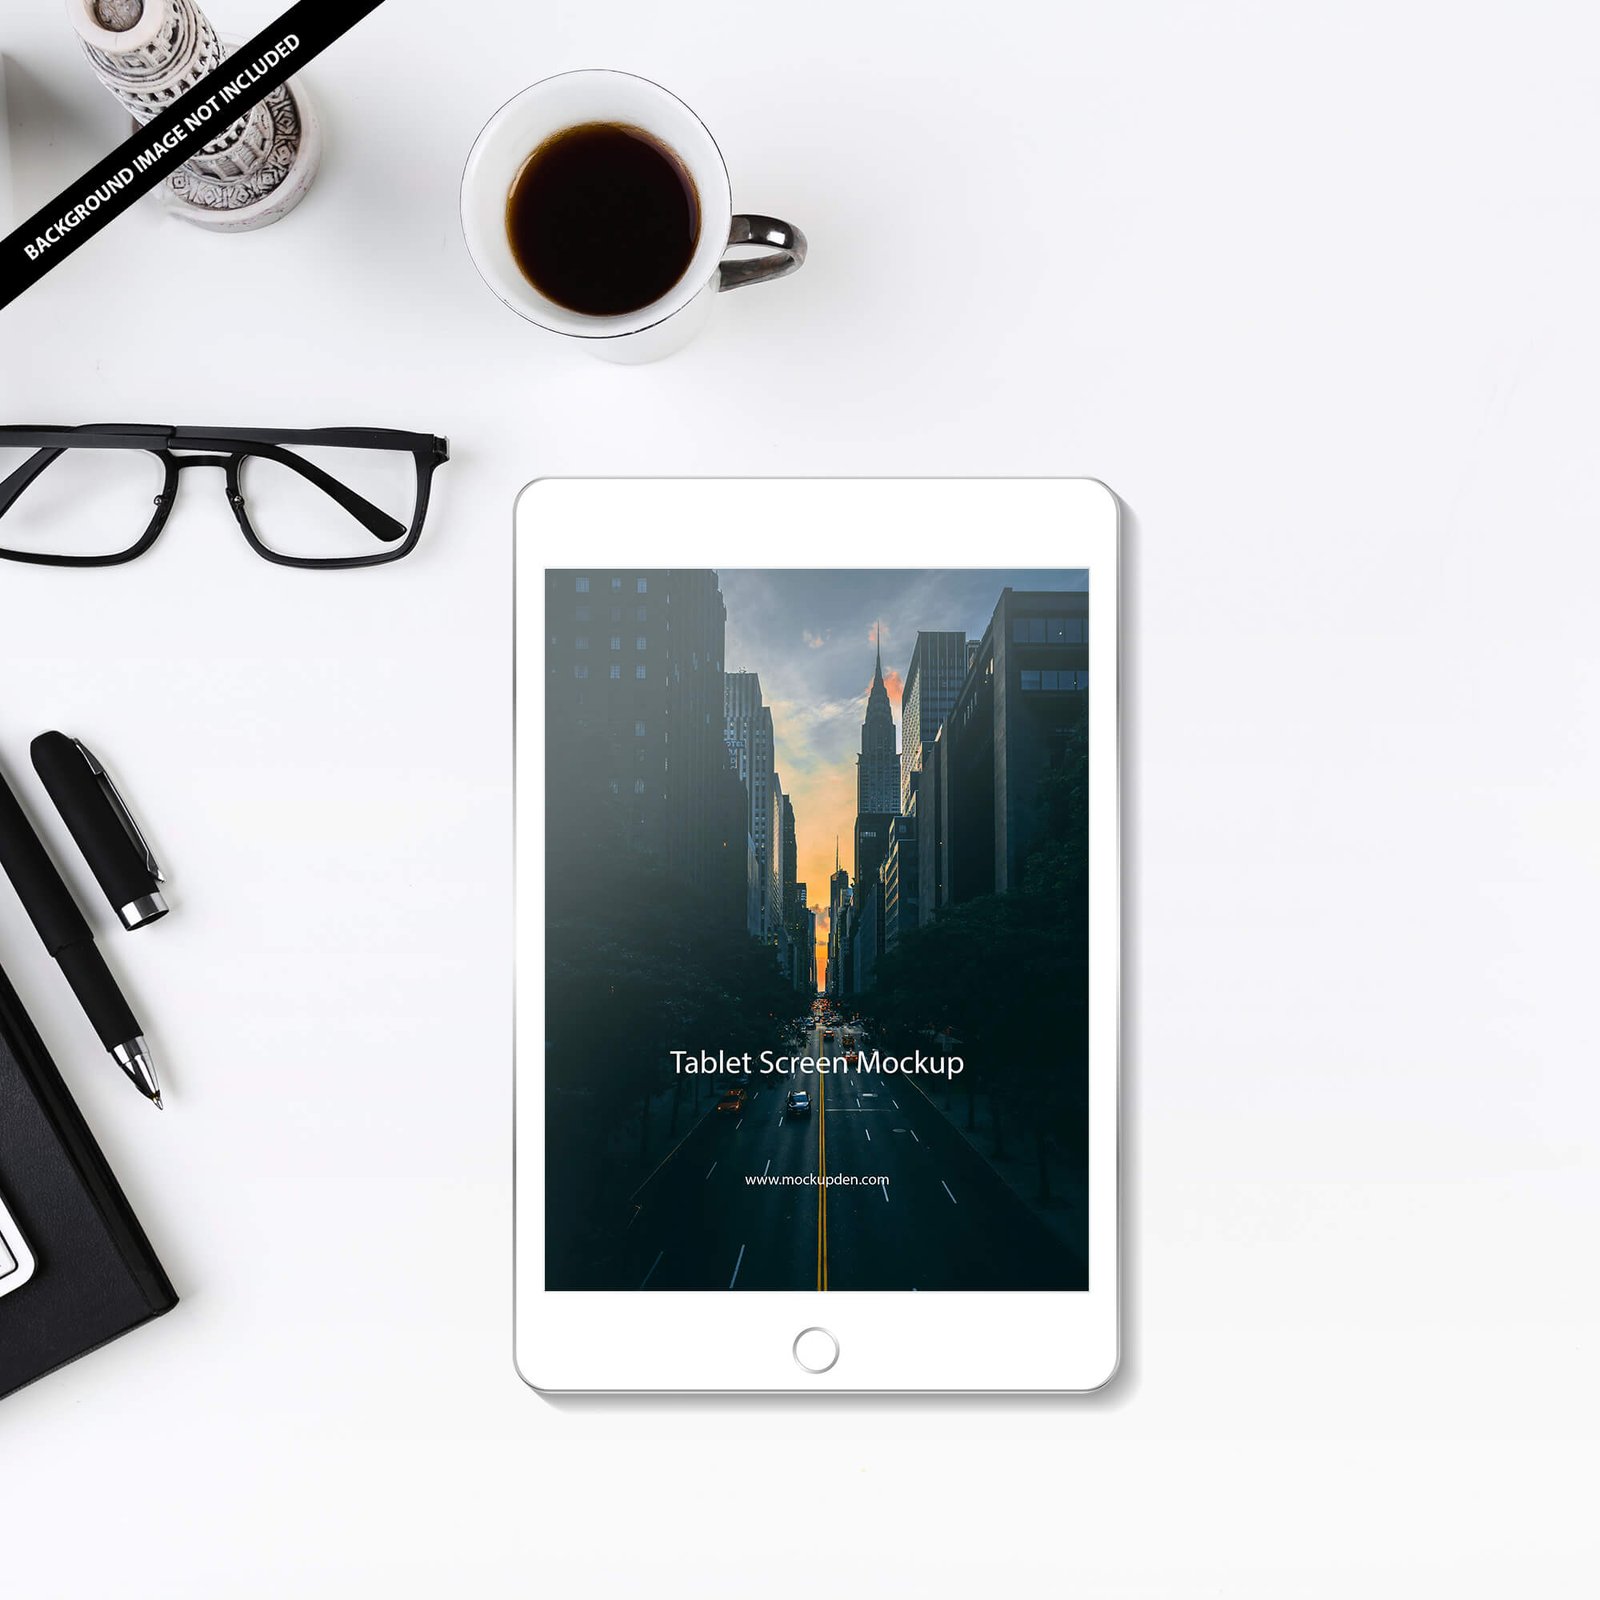 Free Tablet Screen Mockup PSD Template